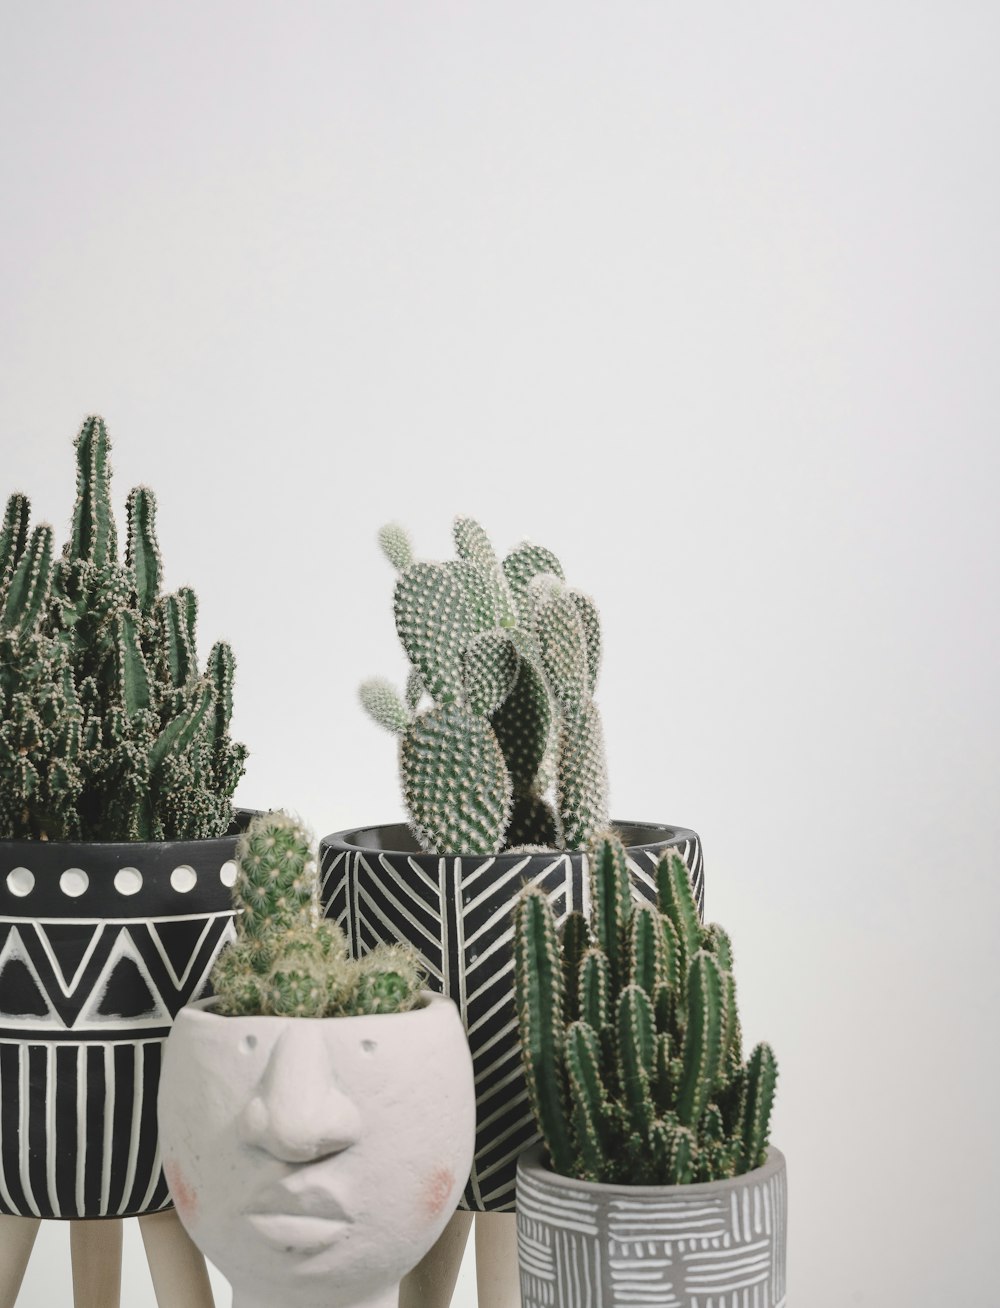 green cactus plants on white and black checkered table, houseplants,